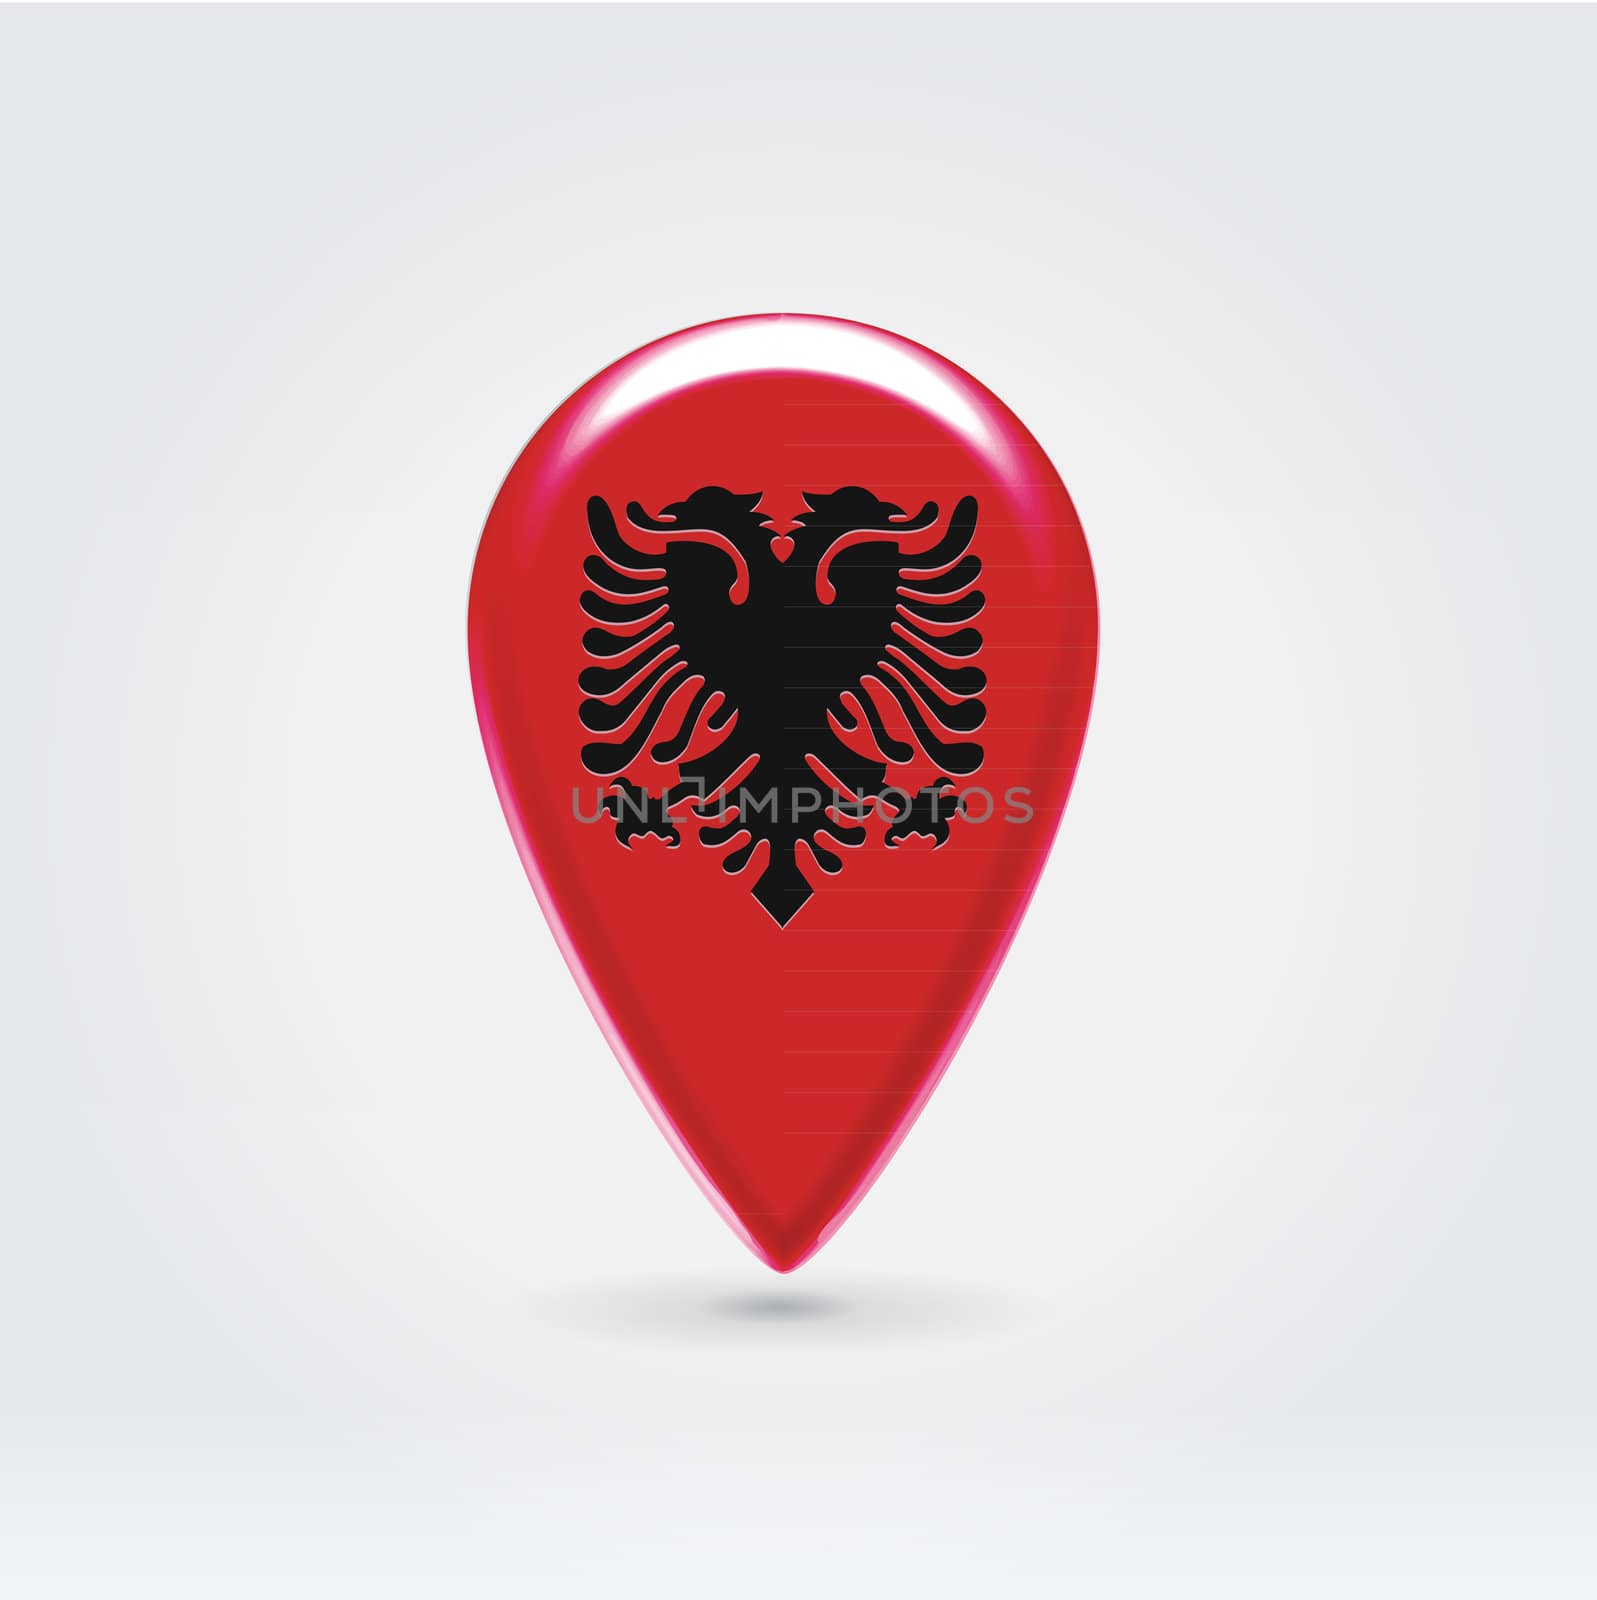 Glossy colorful Albania map application point label symbol hanging over enlighted background